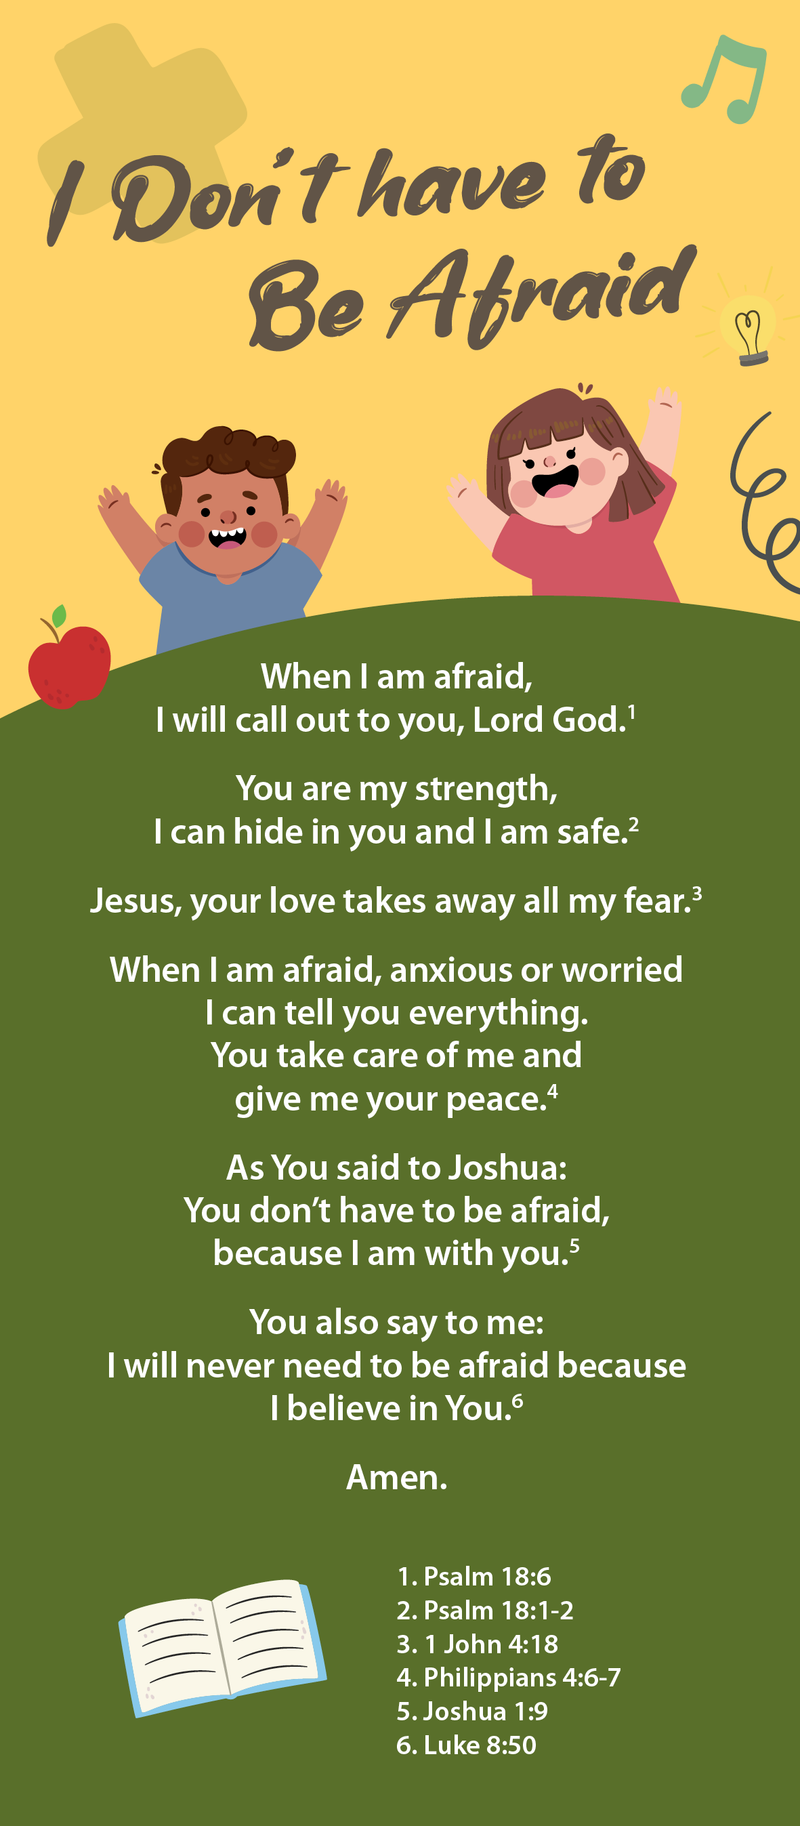 Children's Proclamation - I don't have to be afraid